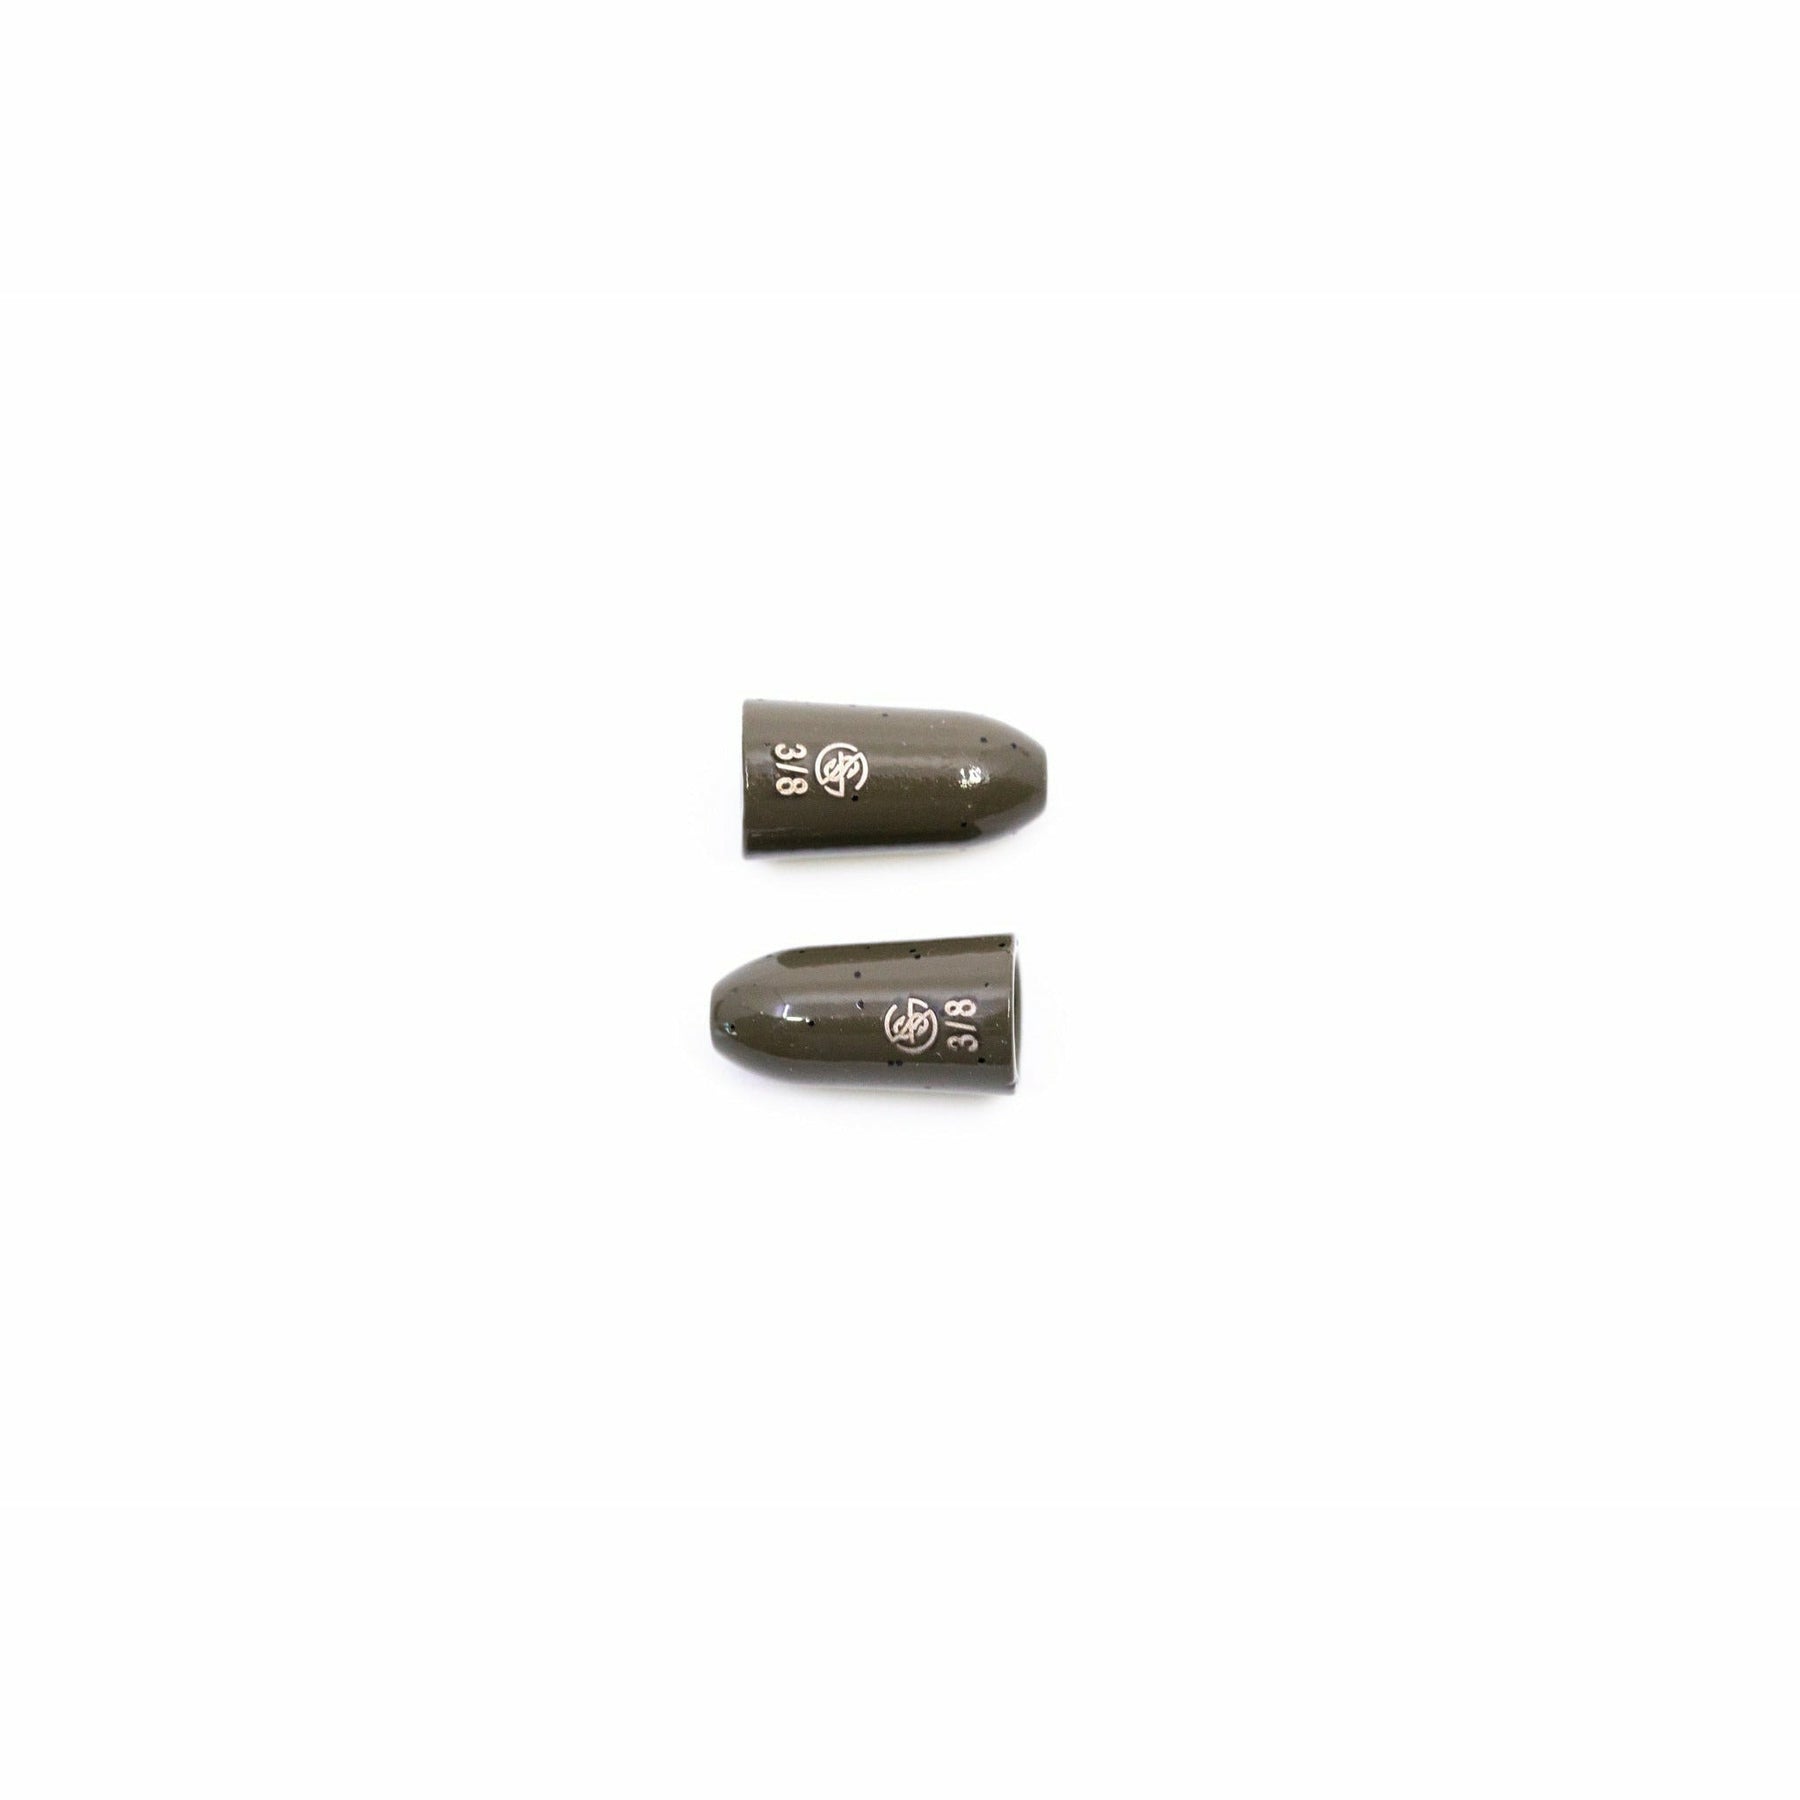  FISHINGKING 5-10 Pcs Tungsten Bullet Worm Weights 1/8